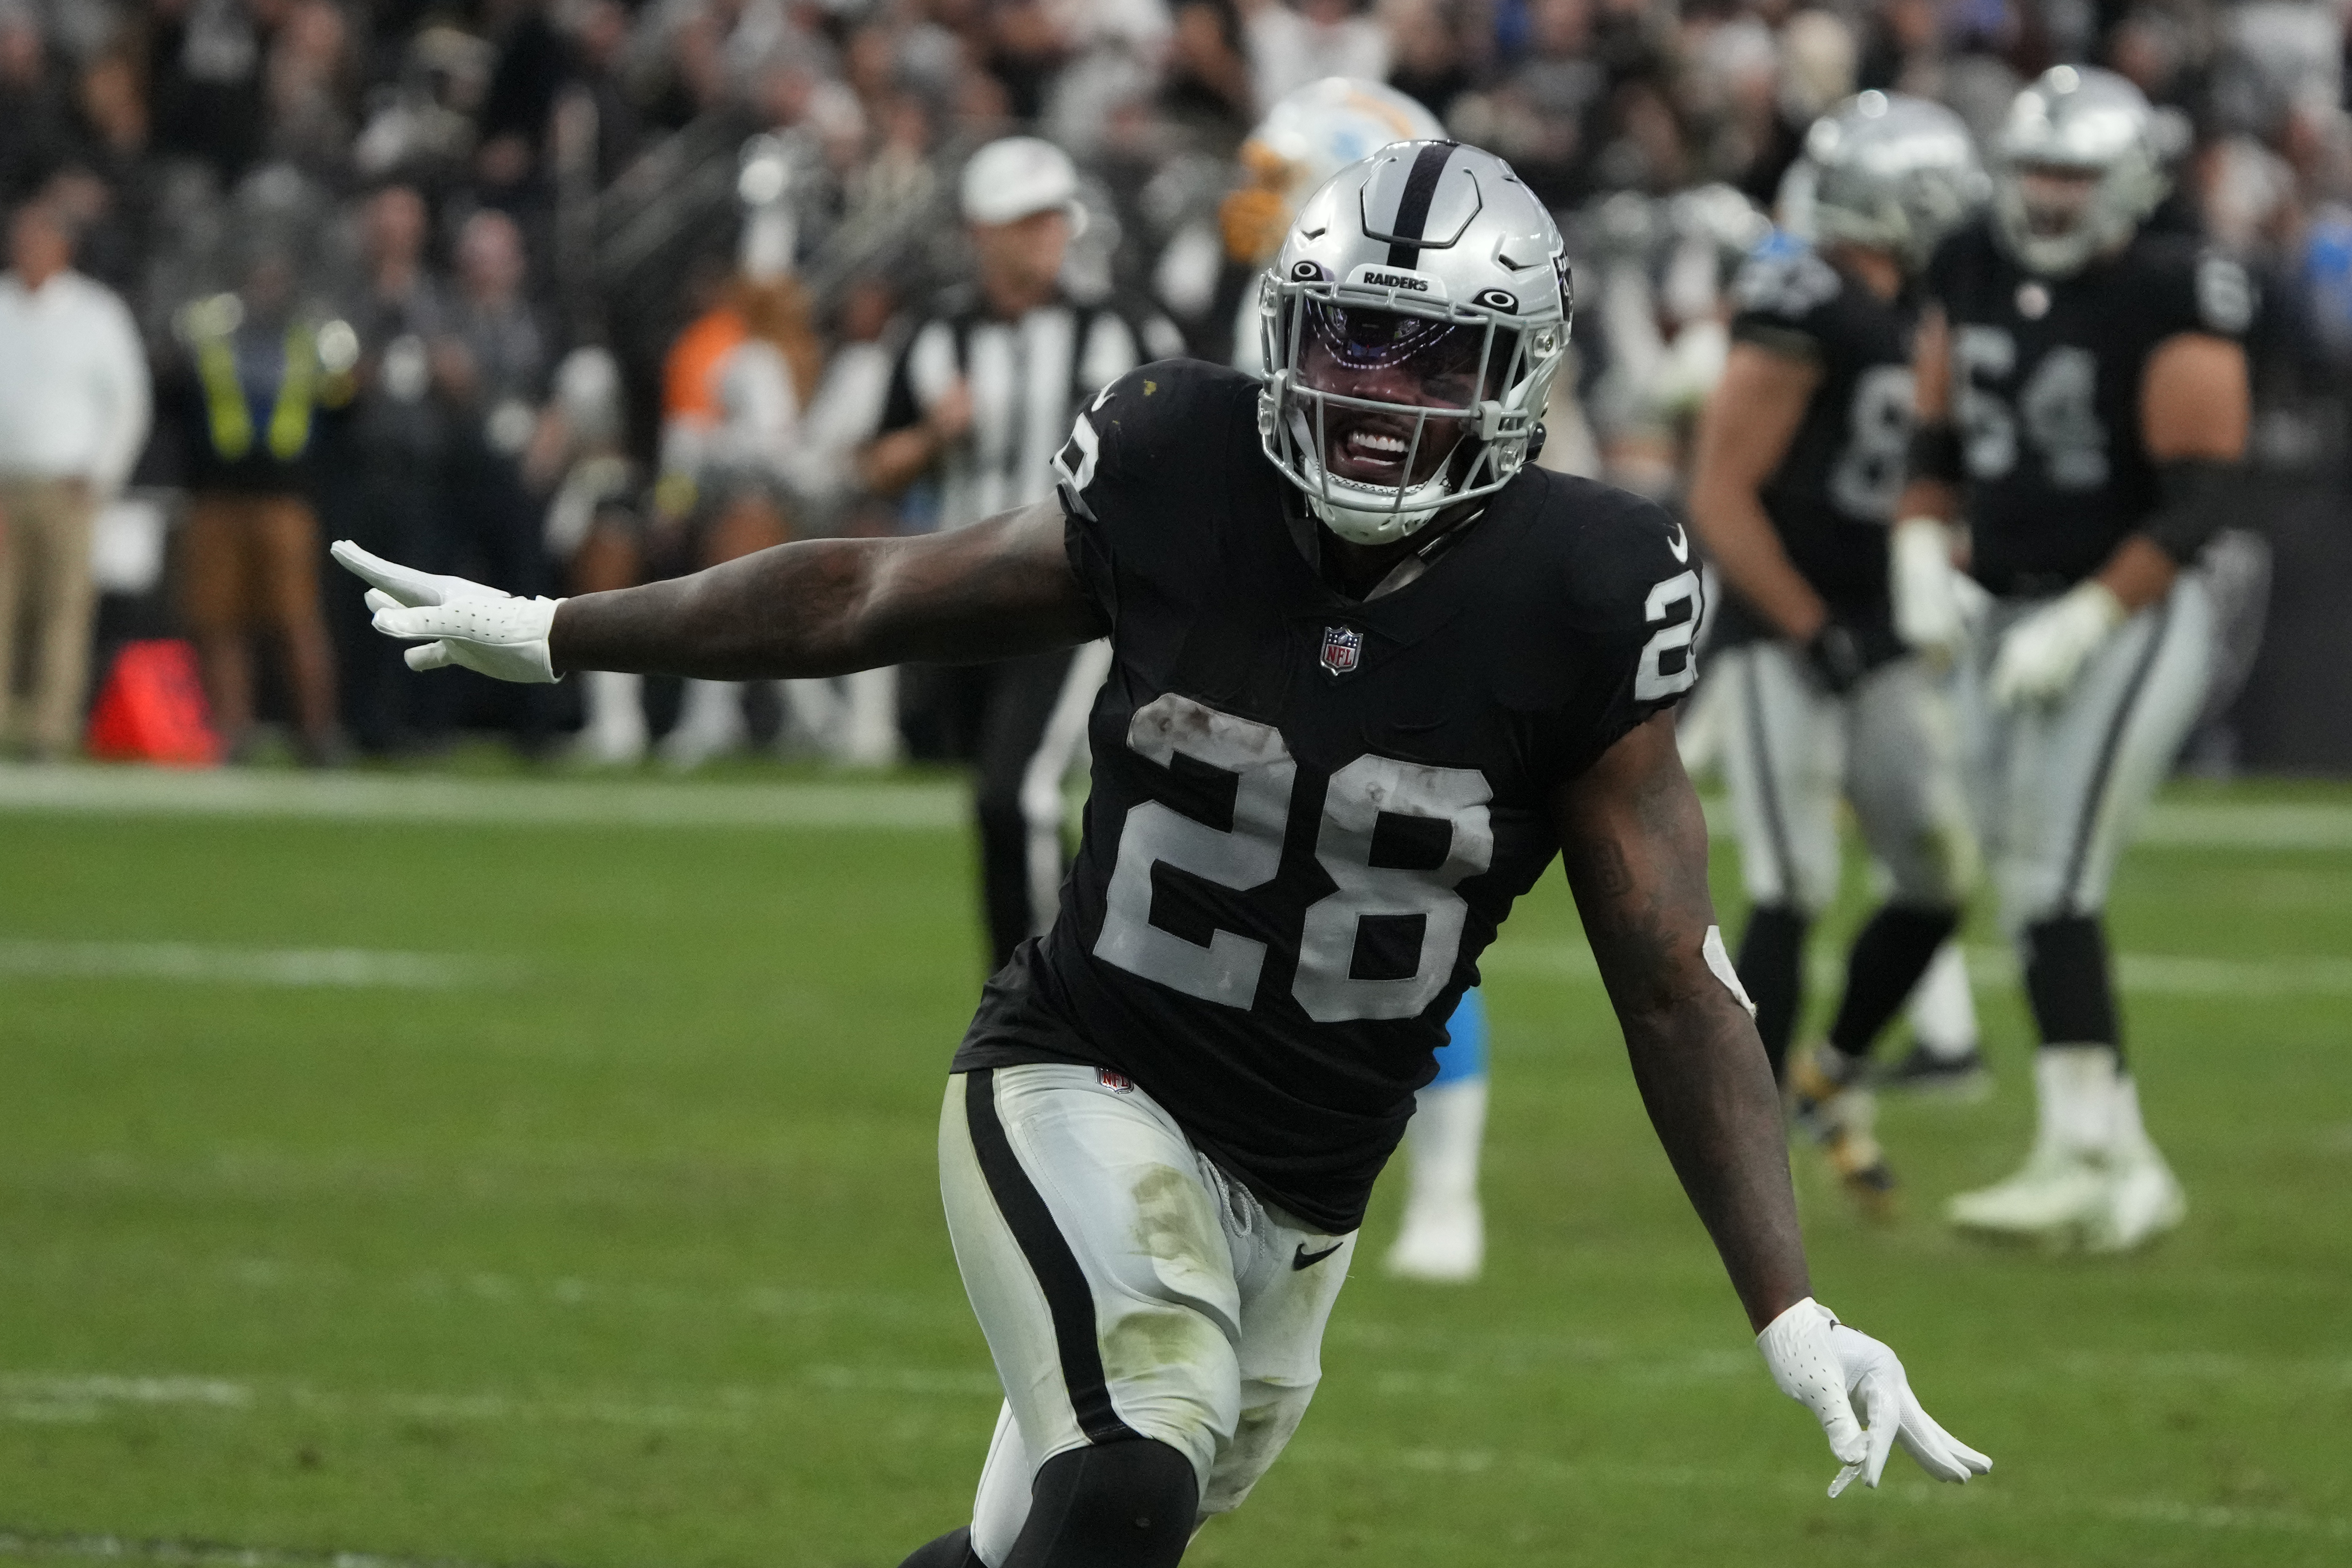 The Raiders have the edge in talent and familiarity, but does that